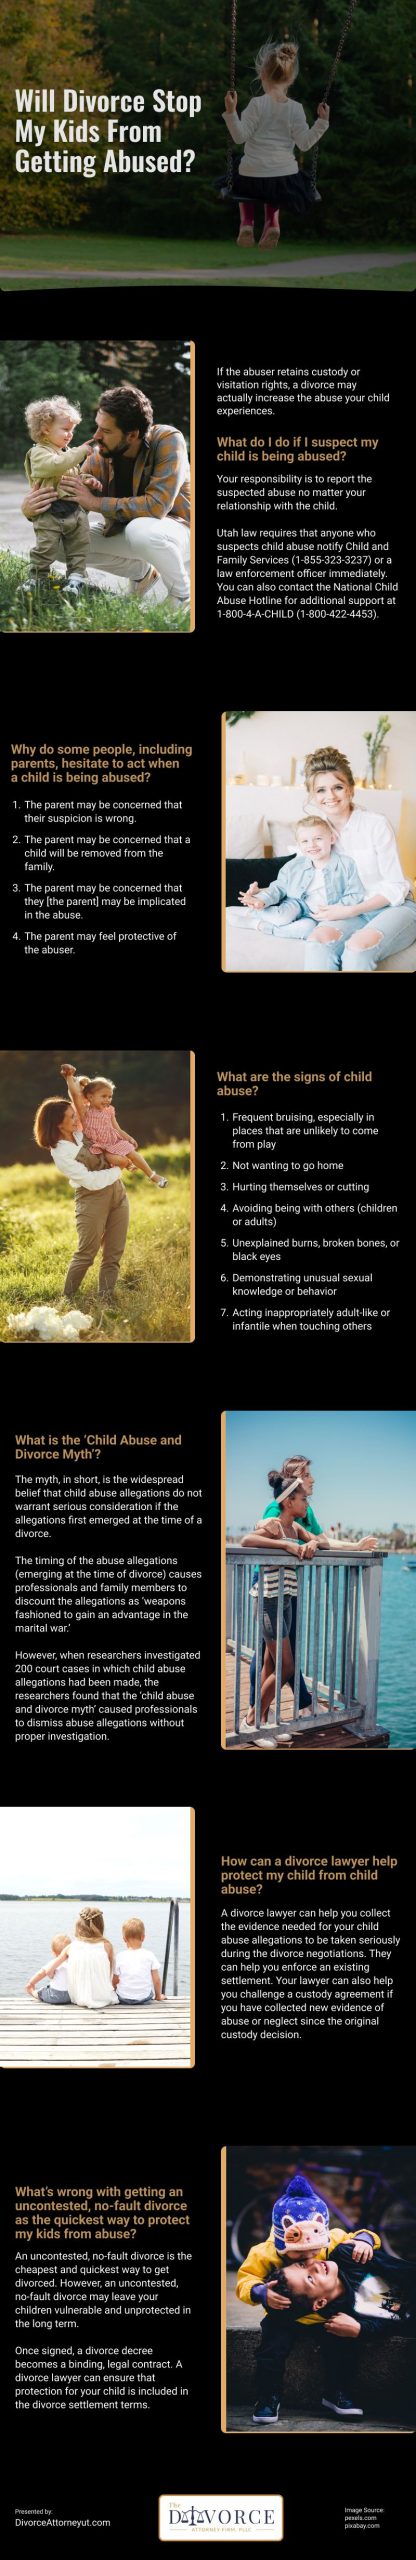 Will Divorce Stop My Kids from Getting Abused Infographic